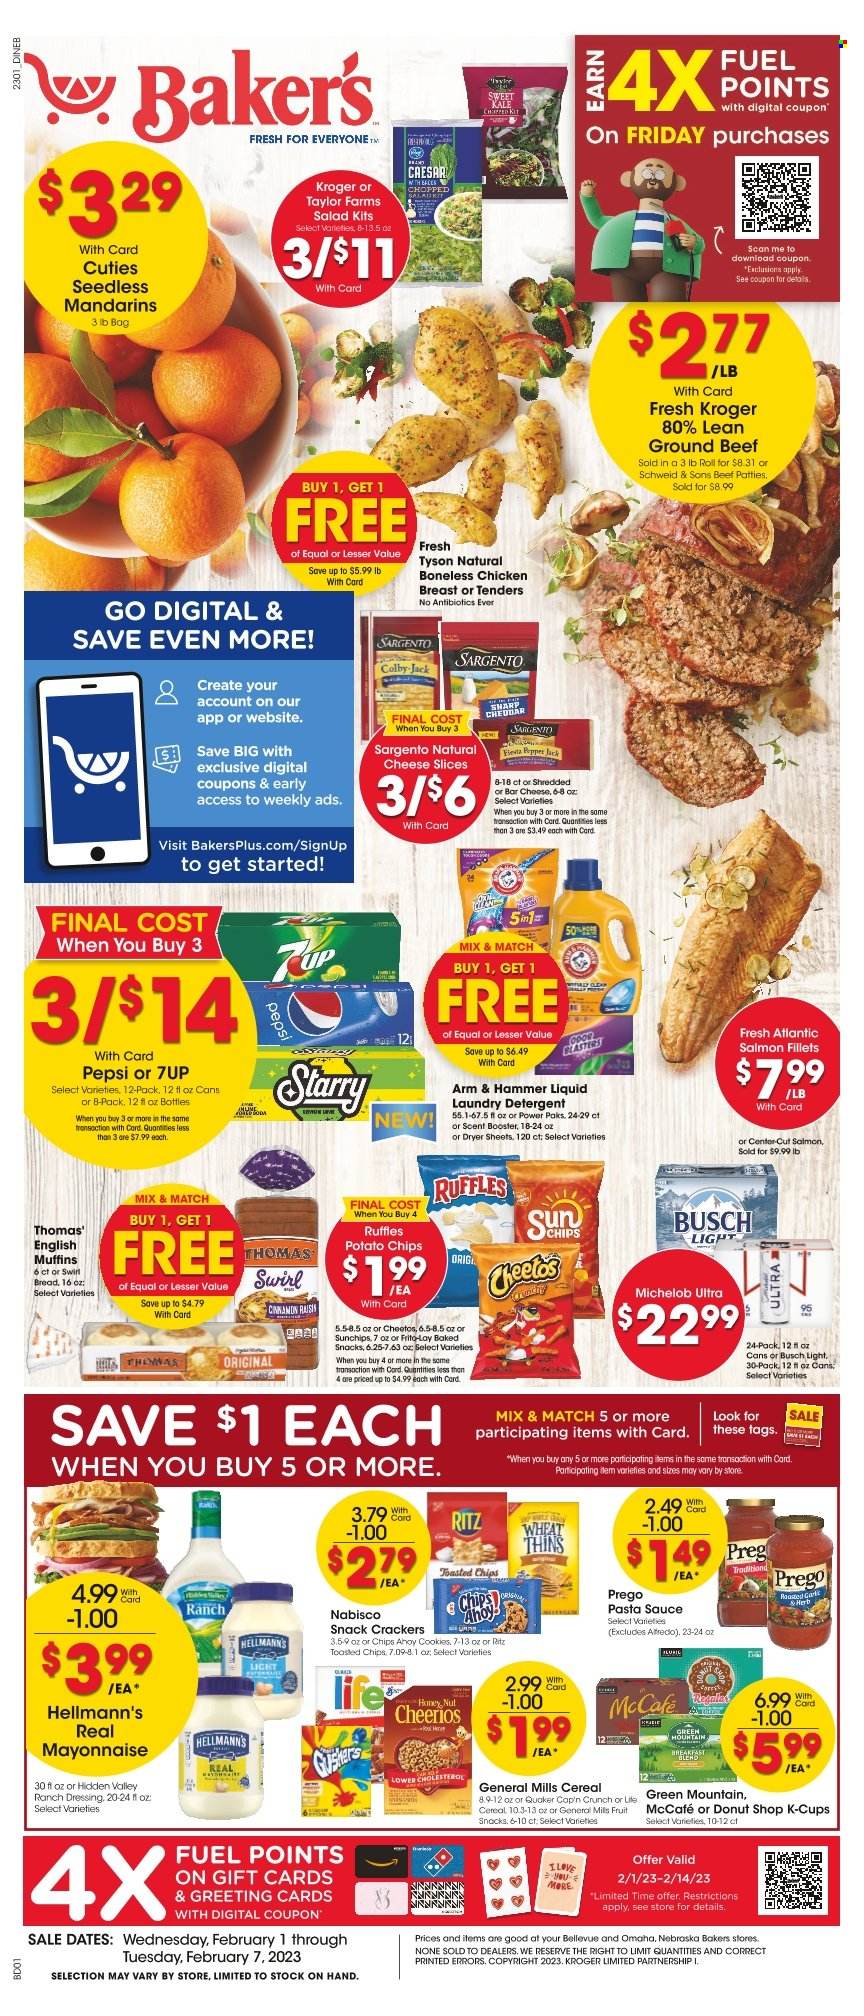 thumbnail - Baker's Flyer - 02/01/2023 - 02/07/2023 - Sales products - english muffins, salad, mandarines, salmon, salmon fillet, pasta sauce, sauce, Quaker, Colby cheese, sliced cheese, Pepper Jack cheese, Sargento, Oreo, mayonnaise, ranch dressing, Hellmann’s, cookies, crackers, fruit snack, RITZ, potato chips, Cheetos, chips, Thins, Frito-Lay, Ruffles, ARM & HAMMER, cereals, Cheerios, Cap'n Crunch, dressing, Pepsi, 7UP, coffee capsules, McCafe, K-Cups, Green Mountain, beer, Busch, chicken breasts, beef meat, ground beef, detergent, laundry detergent, dryer sheets, Sharp, Bakers, Michelob. Page 1.